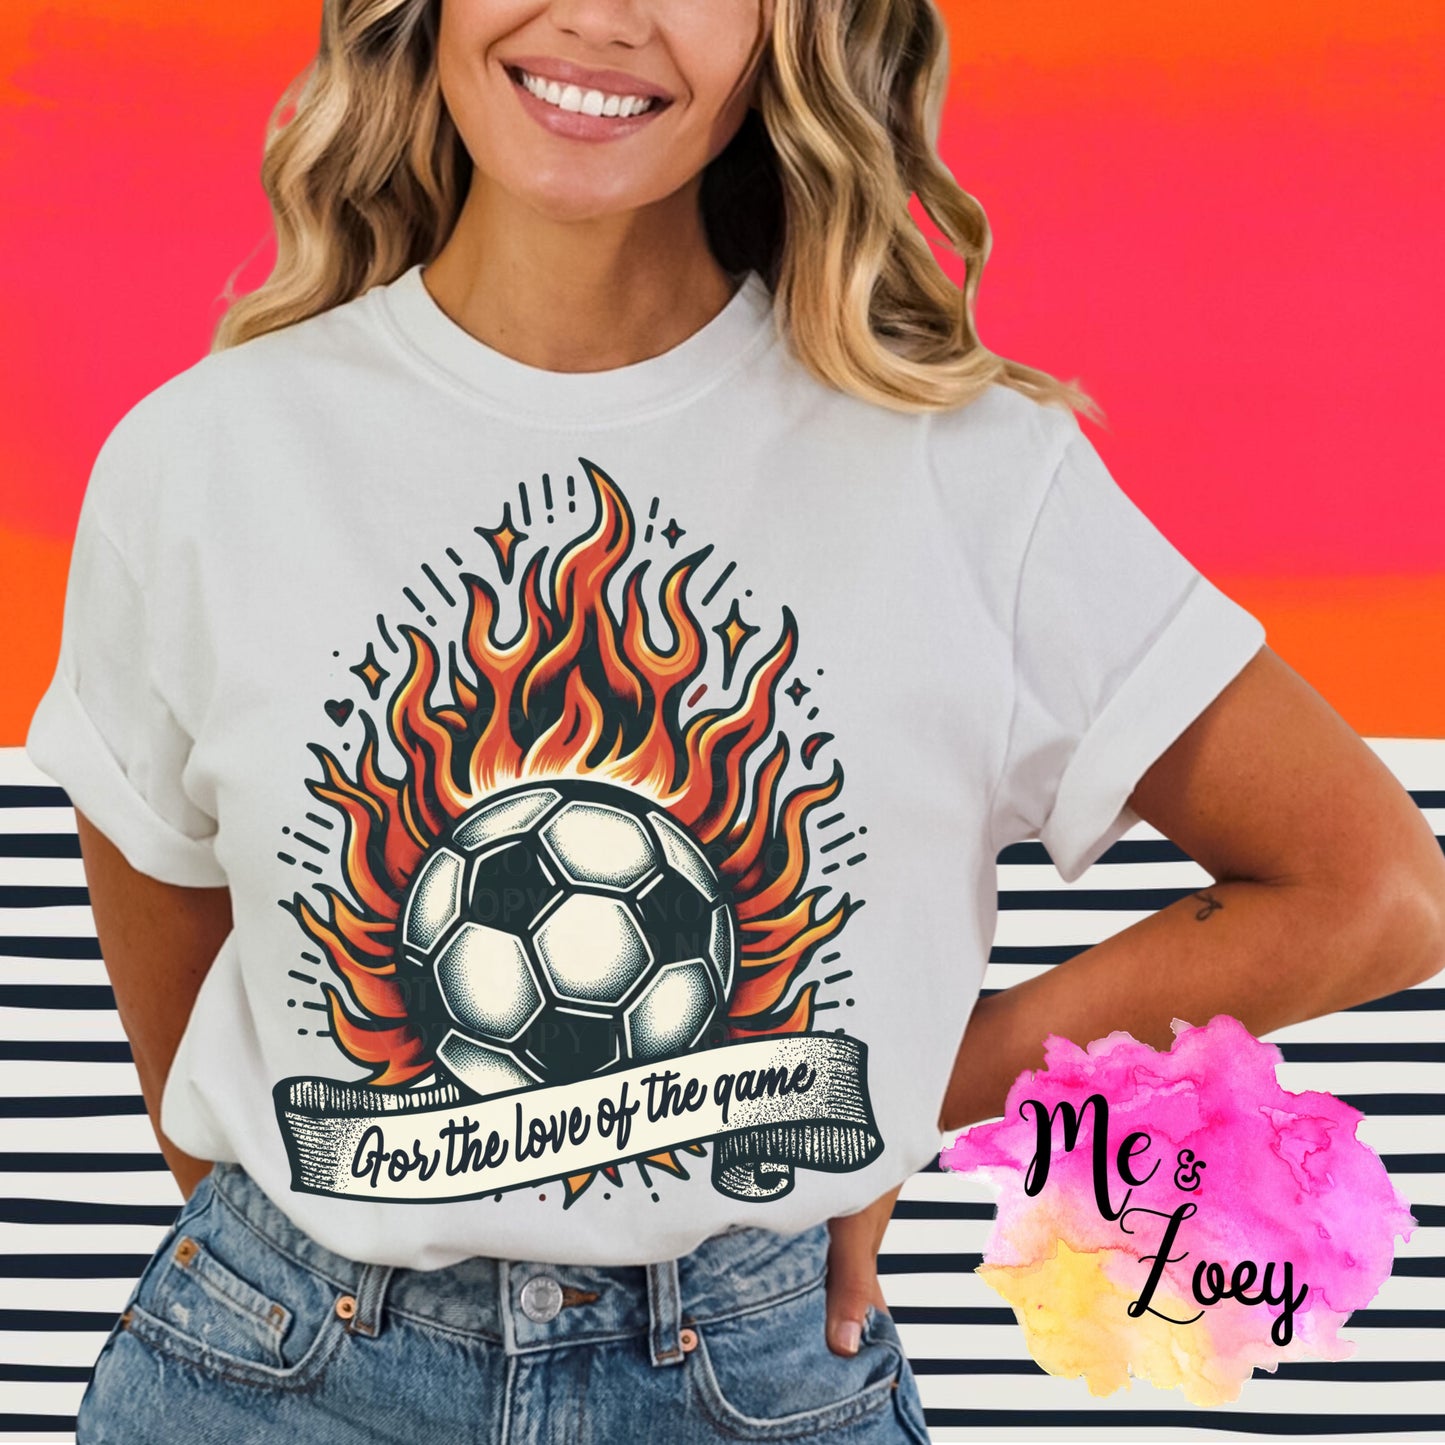 For the Love Of Sports Graphic Tee - MeAndZoey